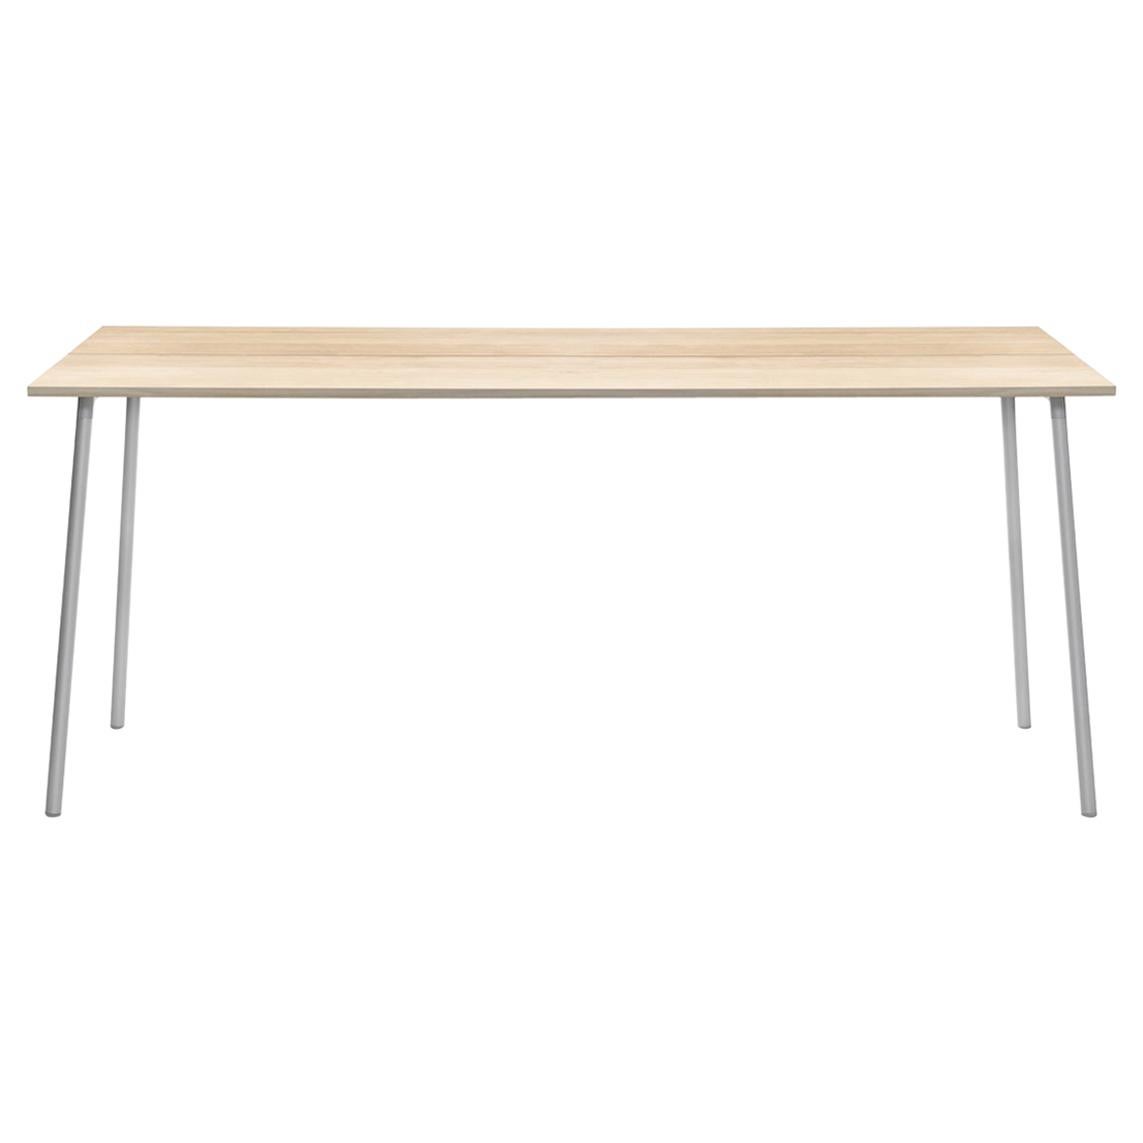 Emeco Run High Table in Accoya with Aluminum Frame by Sam Hecht and Kim Colin For Sale